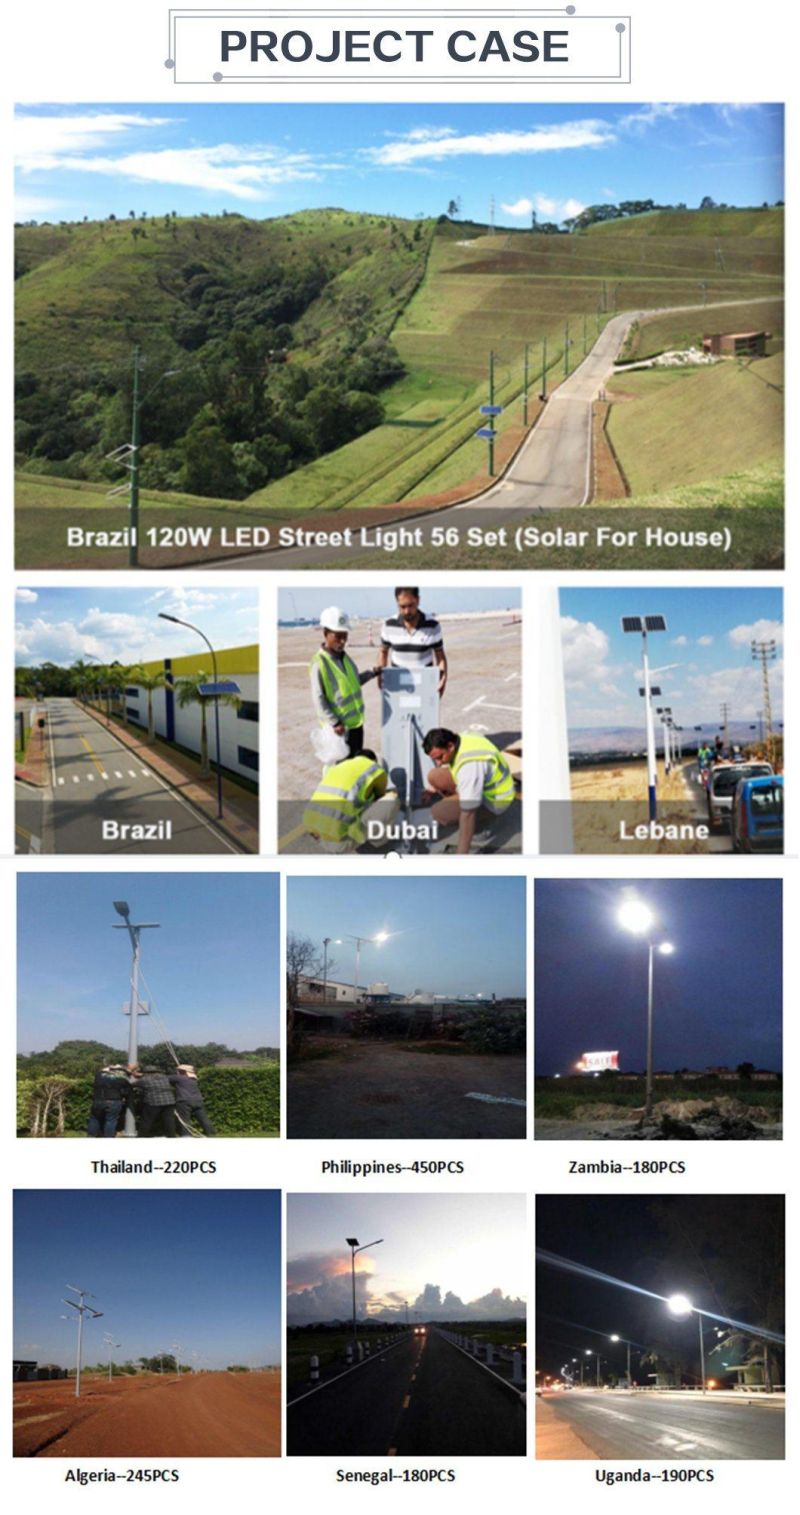 Double Luminaries 60W 70W 80W LED Solar Street Light with Galvanized Steel Poles for Highway Rural Main Road Lighting Project Solution 3 Years Warranty